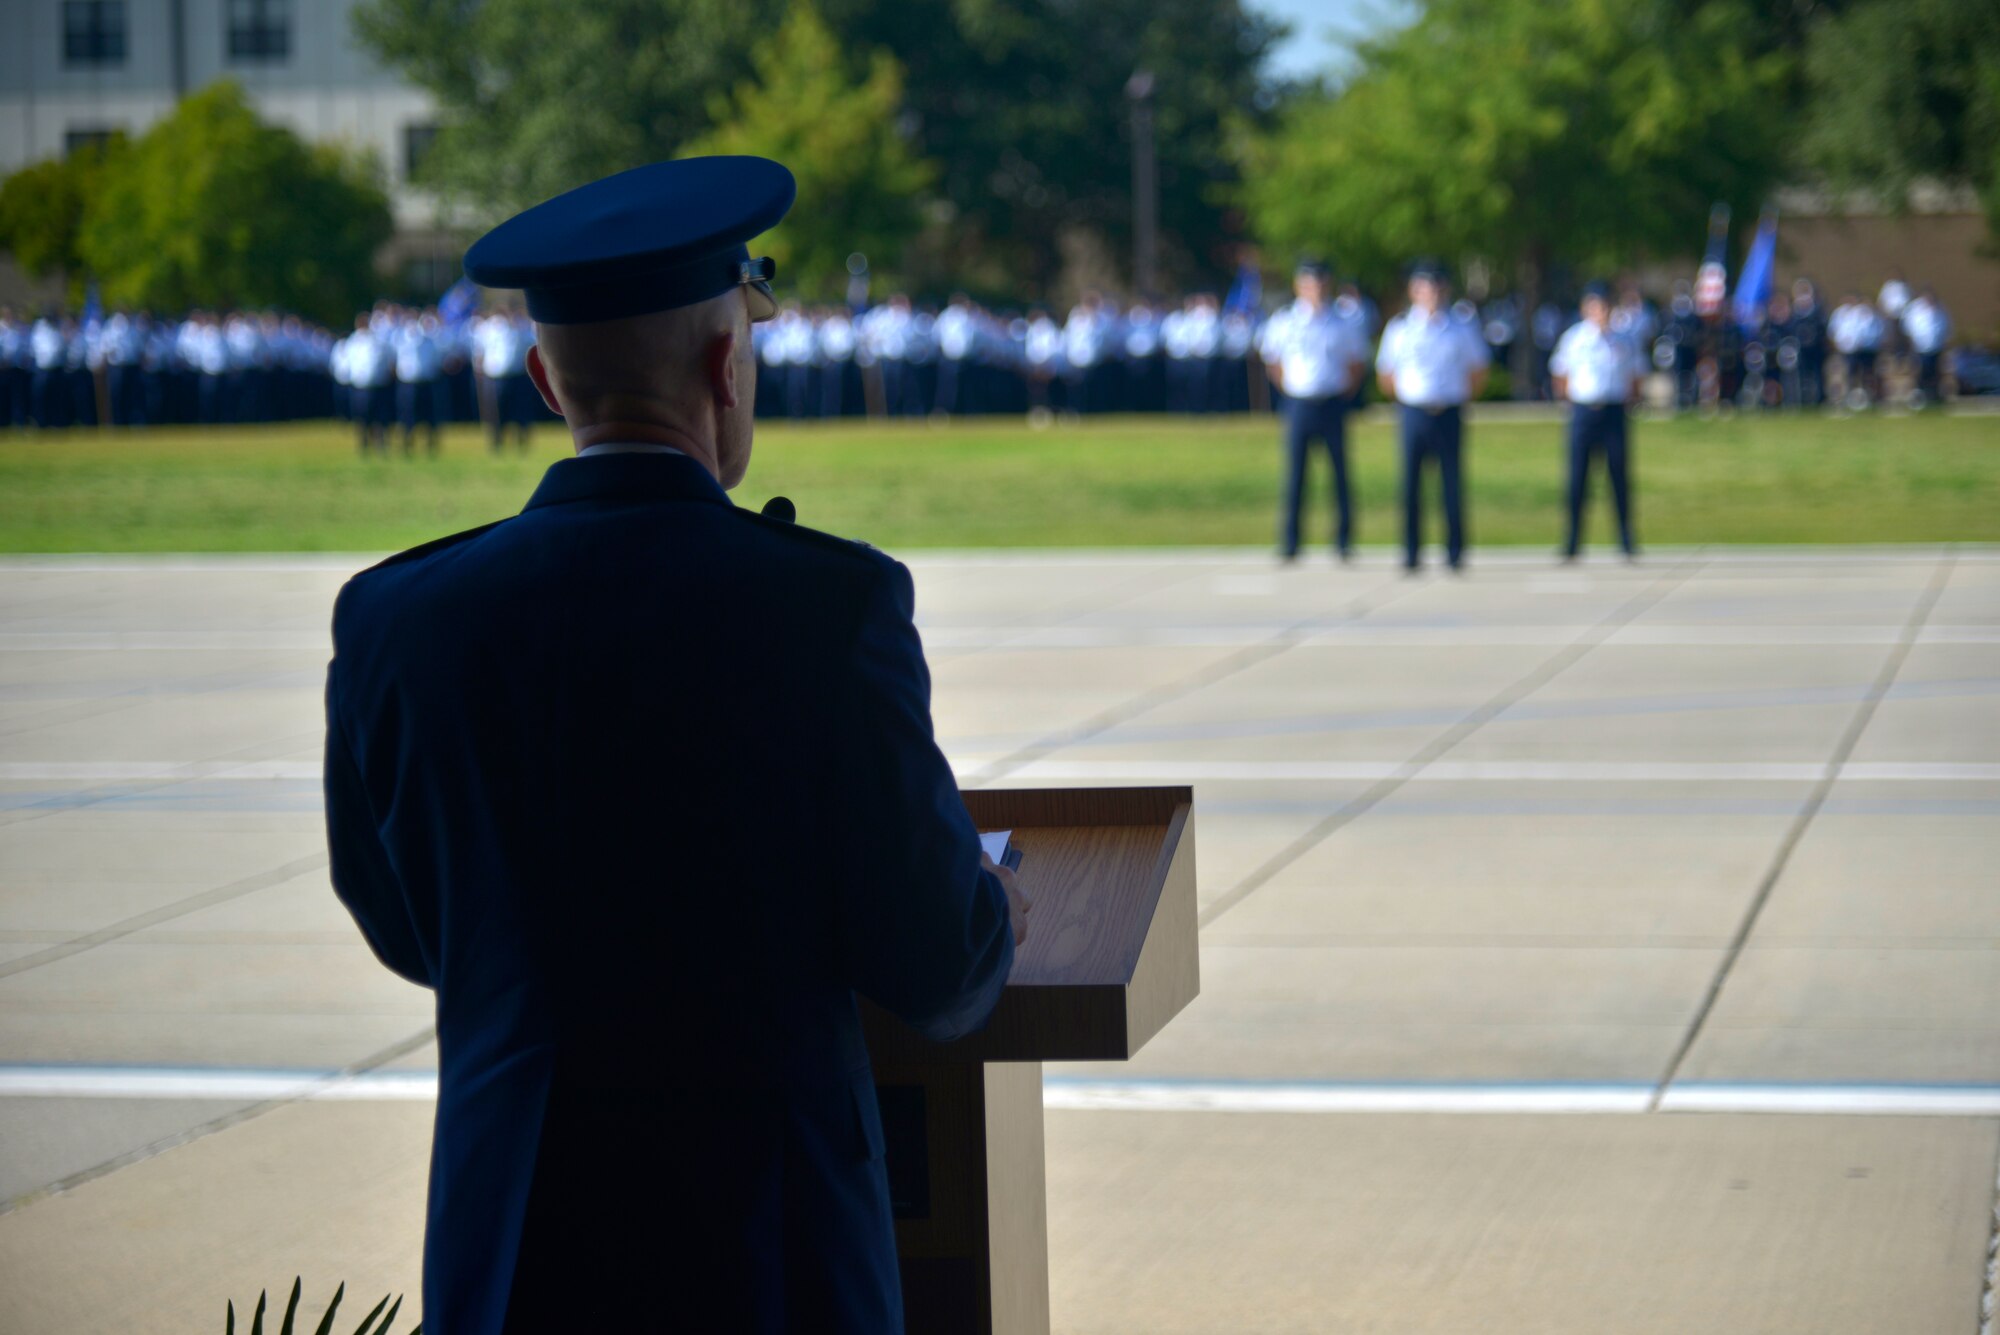 U.S. Air Force Col. Chance Geray, 81st Training Group commander, addresses his new command during the 81st TRG change of command ceremony on the Levitow Training Support Facility drill pad at Keesler Air Force Base, Mississippi, July 1, 2019. Geray assumed command from Col. Leo Lawson Jr., outgoing 81st TRG commander. (U.S. Air Force photo by Airman Seth Haddix)